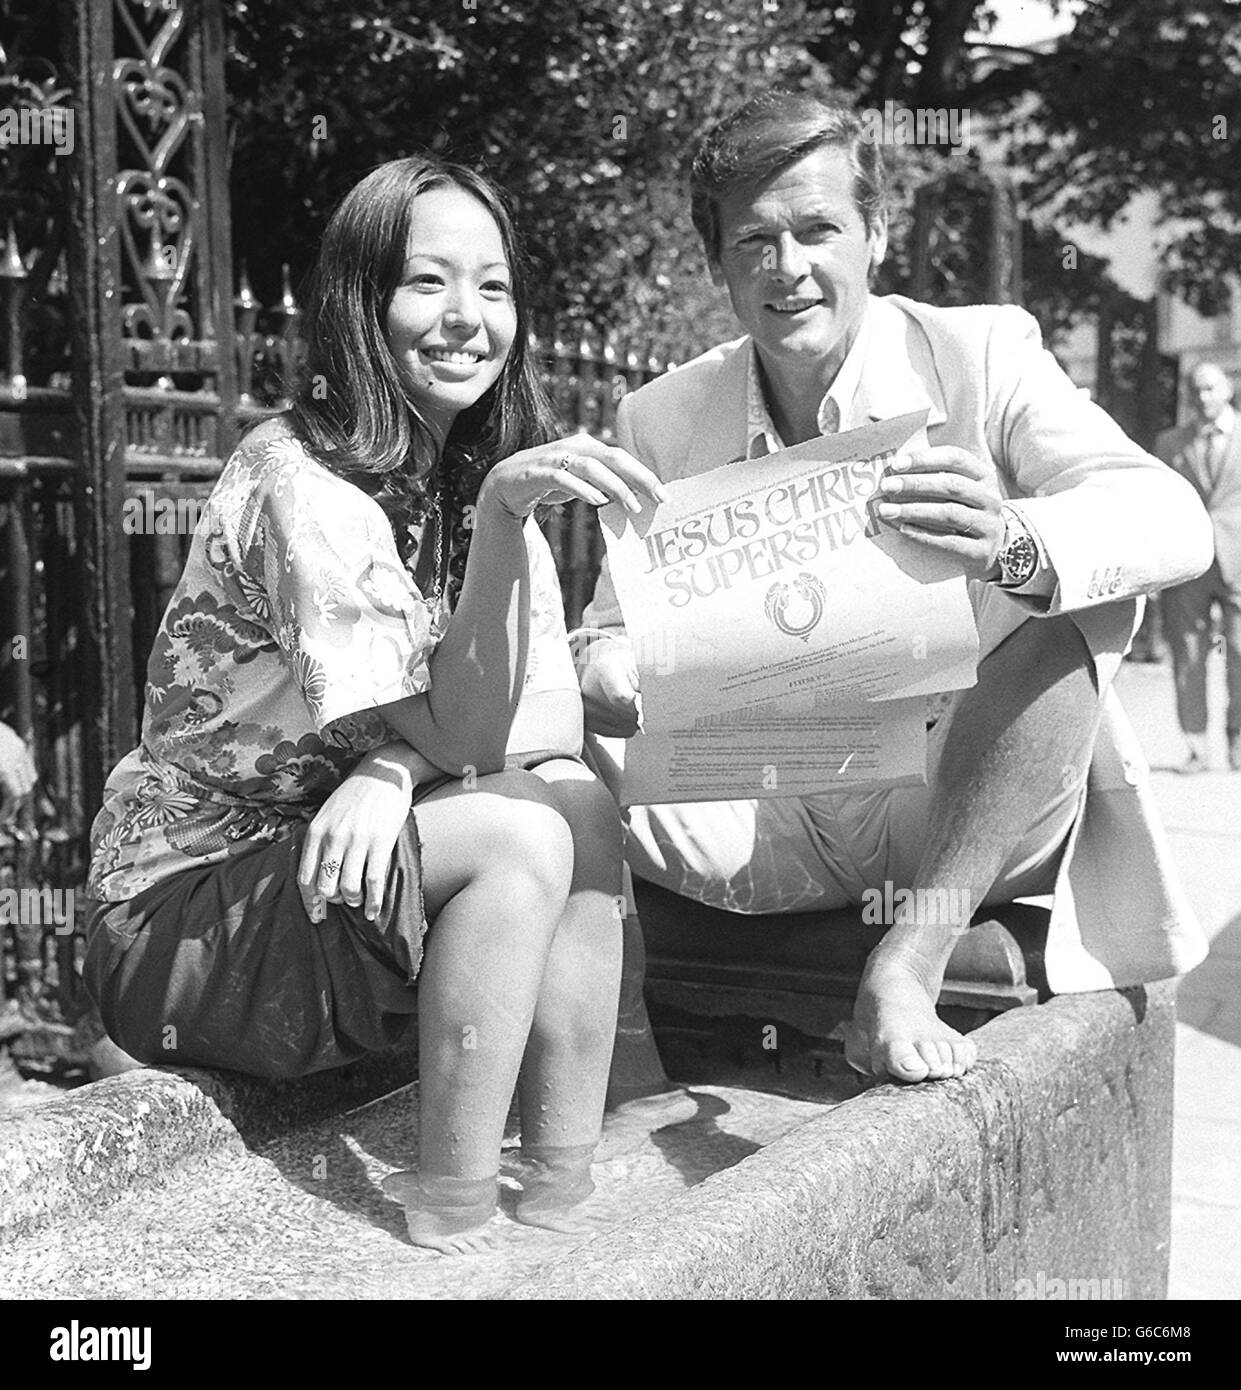 Roger Moore and Yvonne Elliman. Stock Photo